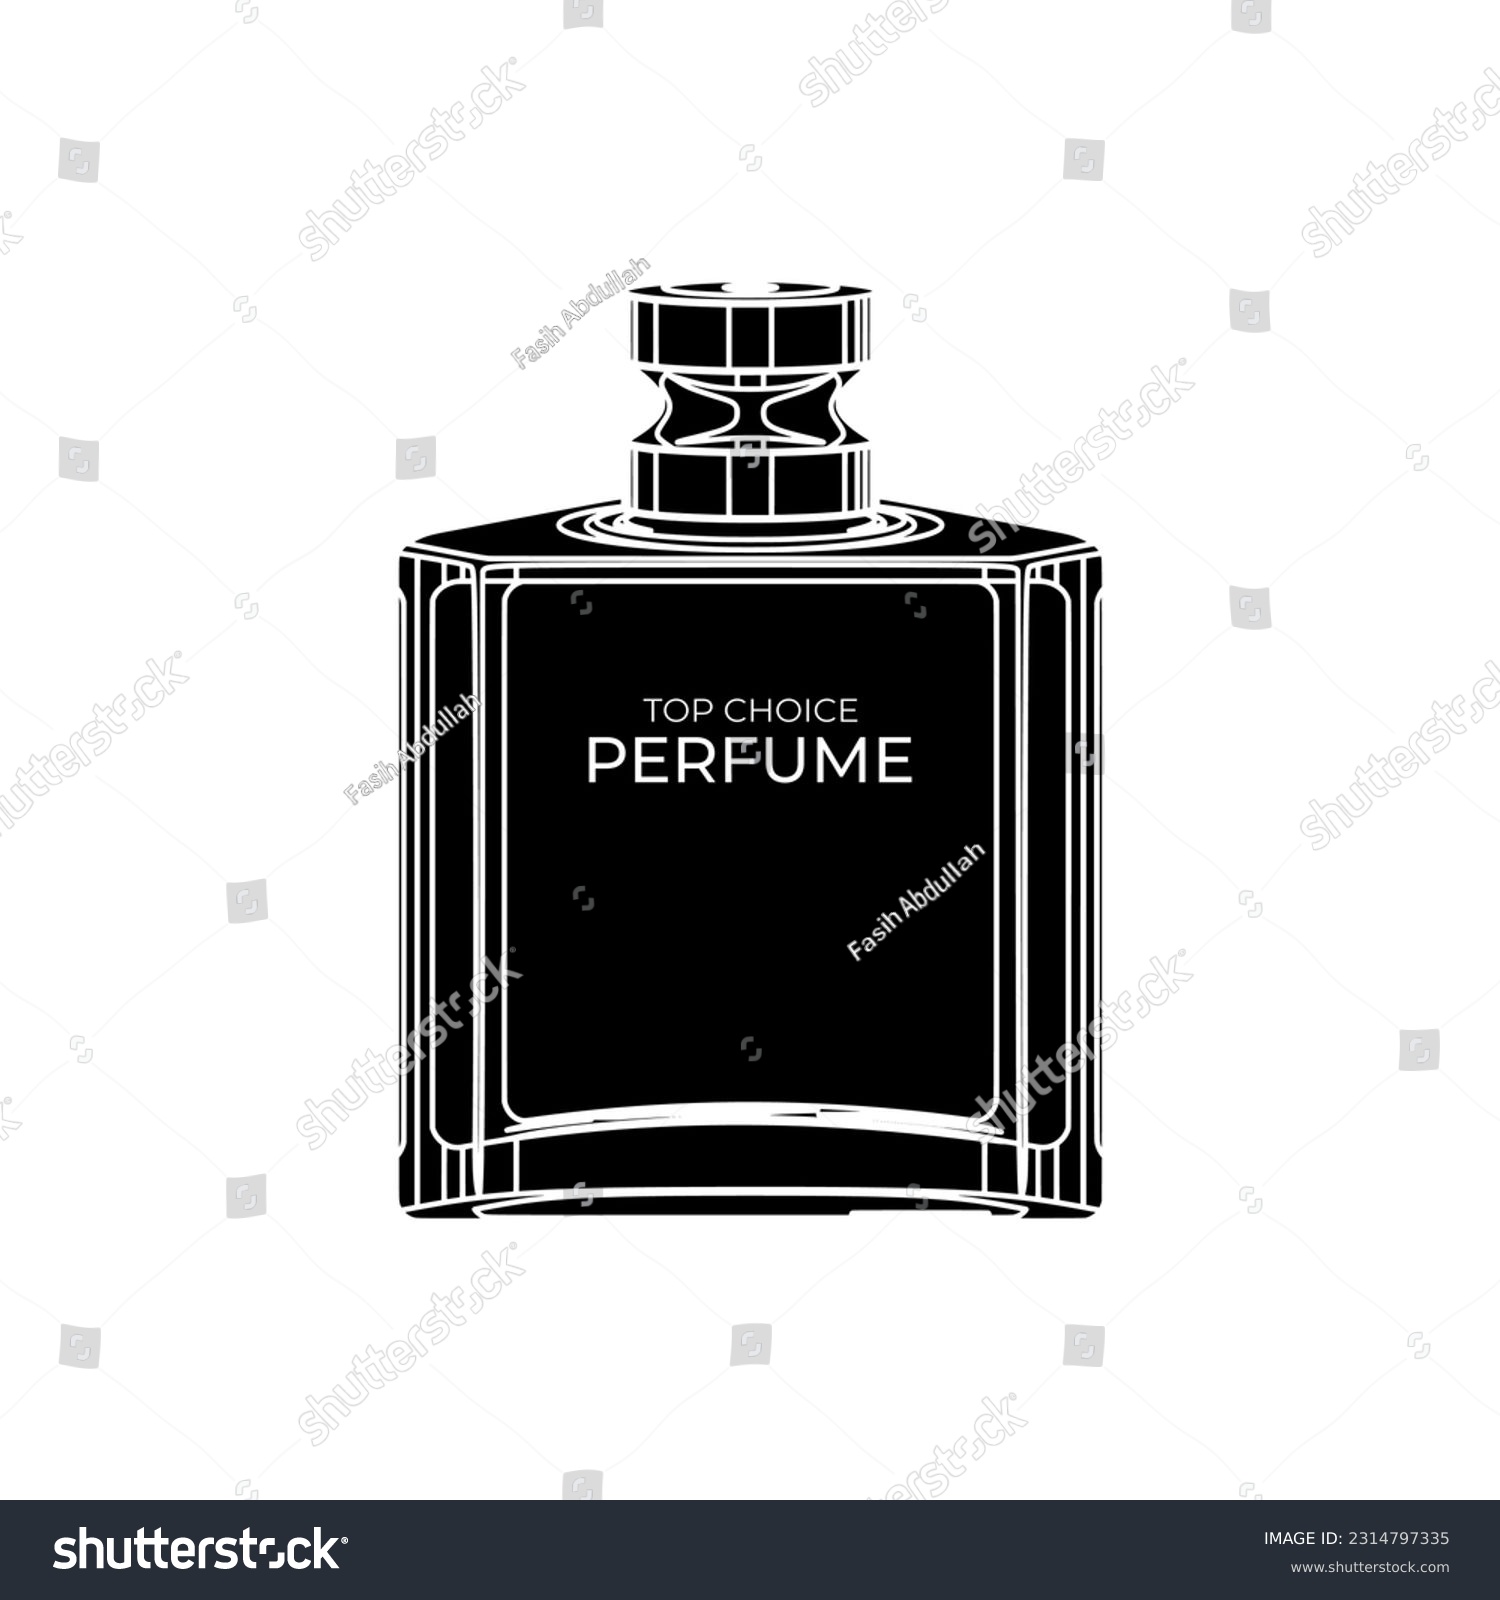 SVG of Square perfume bottle black fill icon, perfume glass bottle packaging vector illustration in trendy style. Popular perfume spray for men in the world. Top choice of editable graphic resources svg